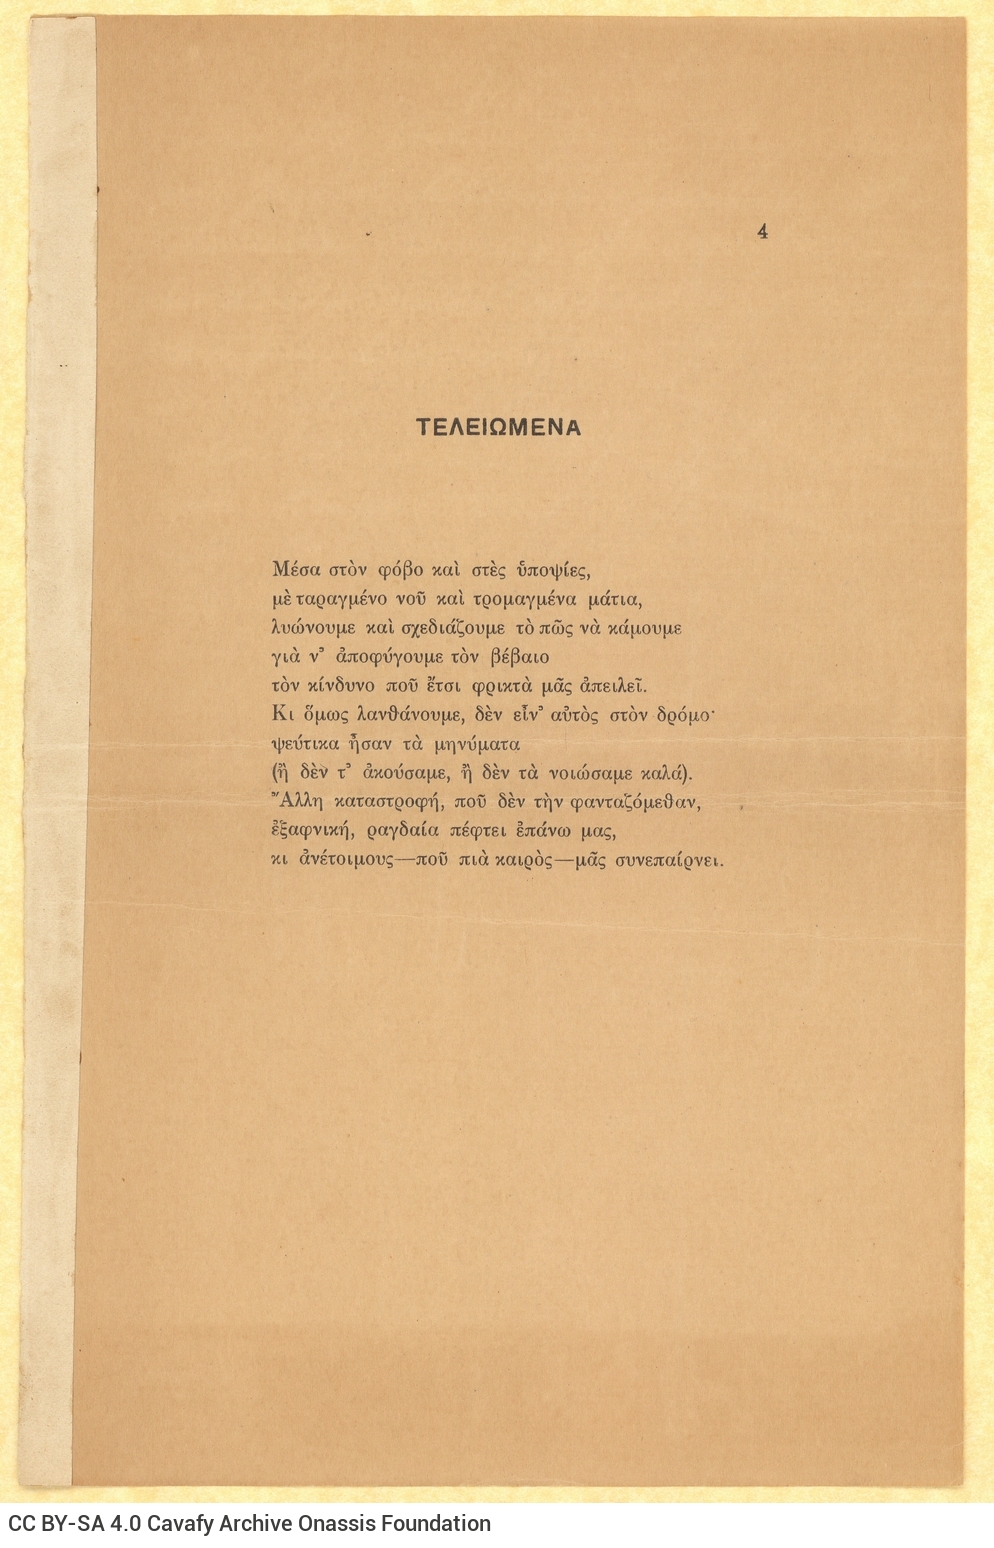 Handwritten English translation of the poem "Finished" by G. Valassopoulo on one side of a sheet, with handwritten cancell